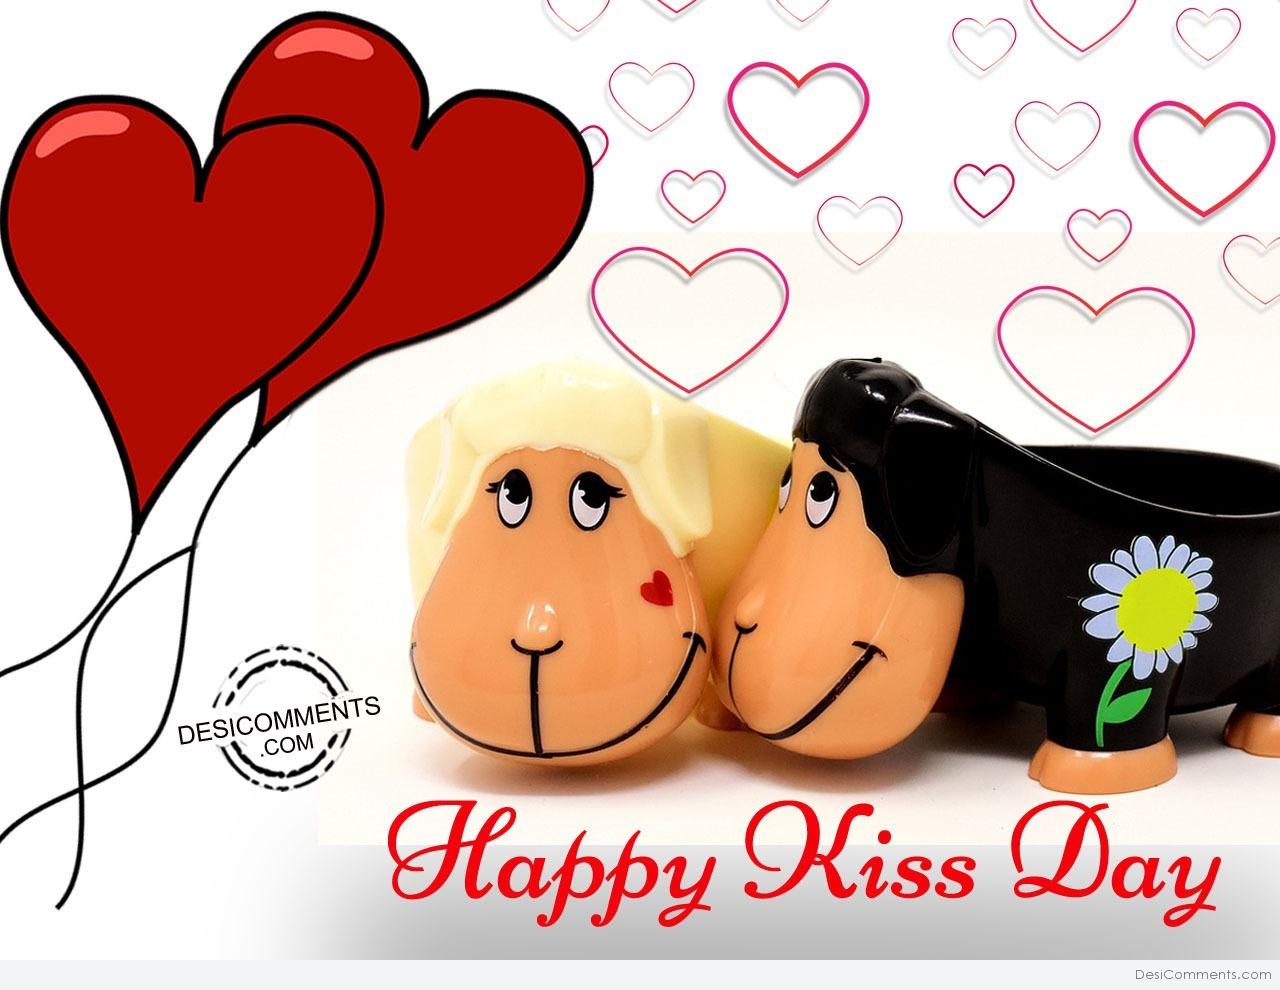 Very happy kiss day - DesiComments.com